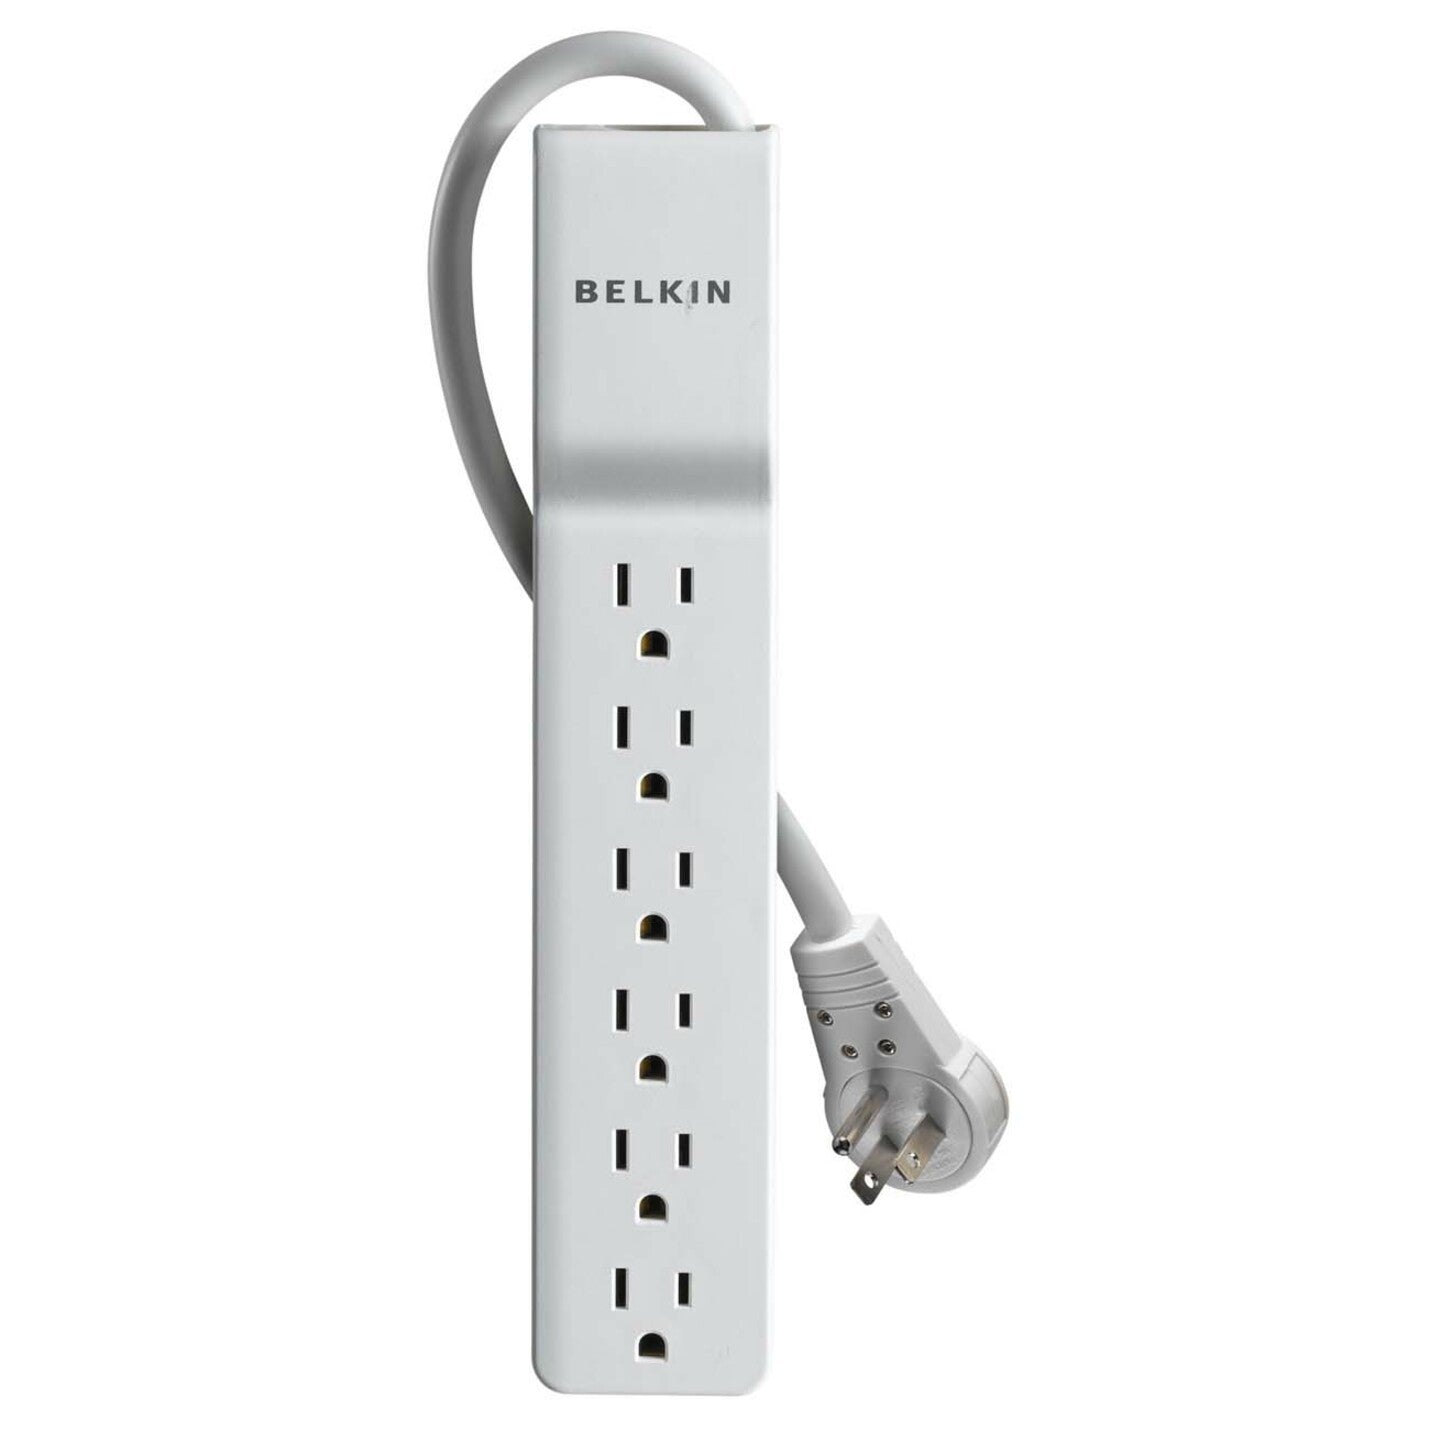 Belkin BE106000-06R Home/Office 6 Outlet Surge Suppressor, 720 J, 6 ft Power Cord [Discontinued]